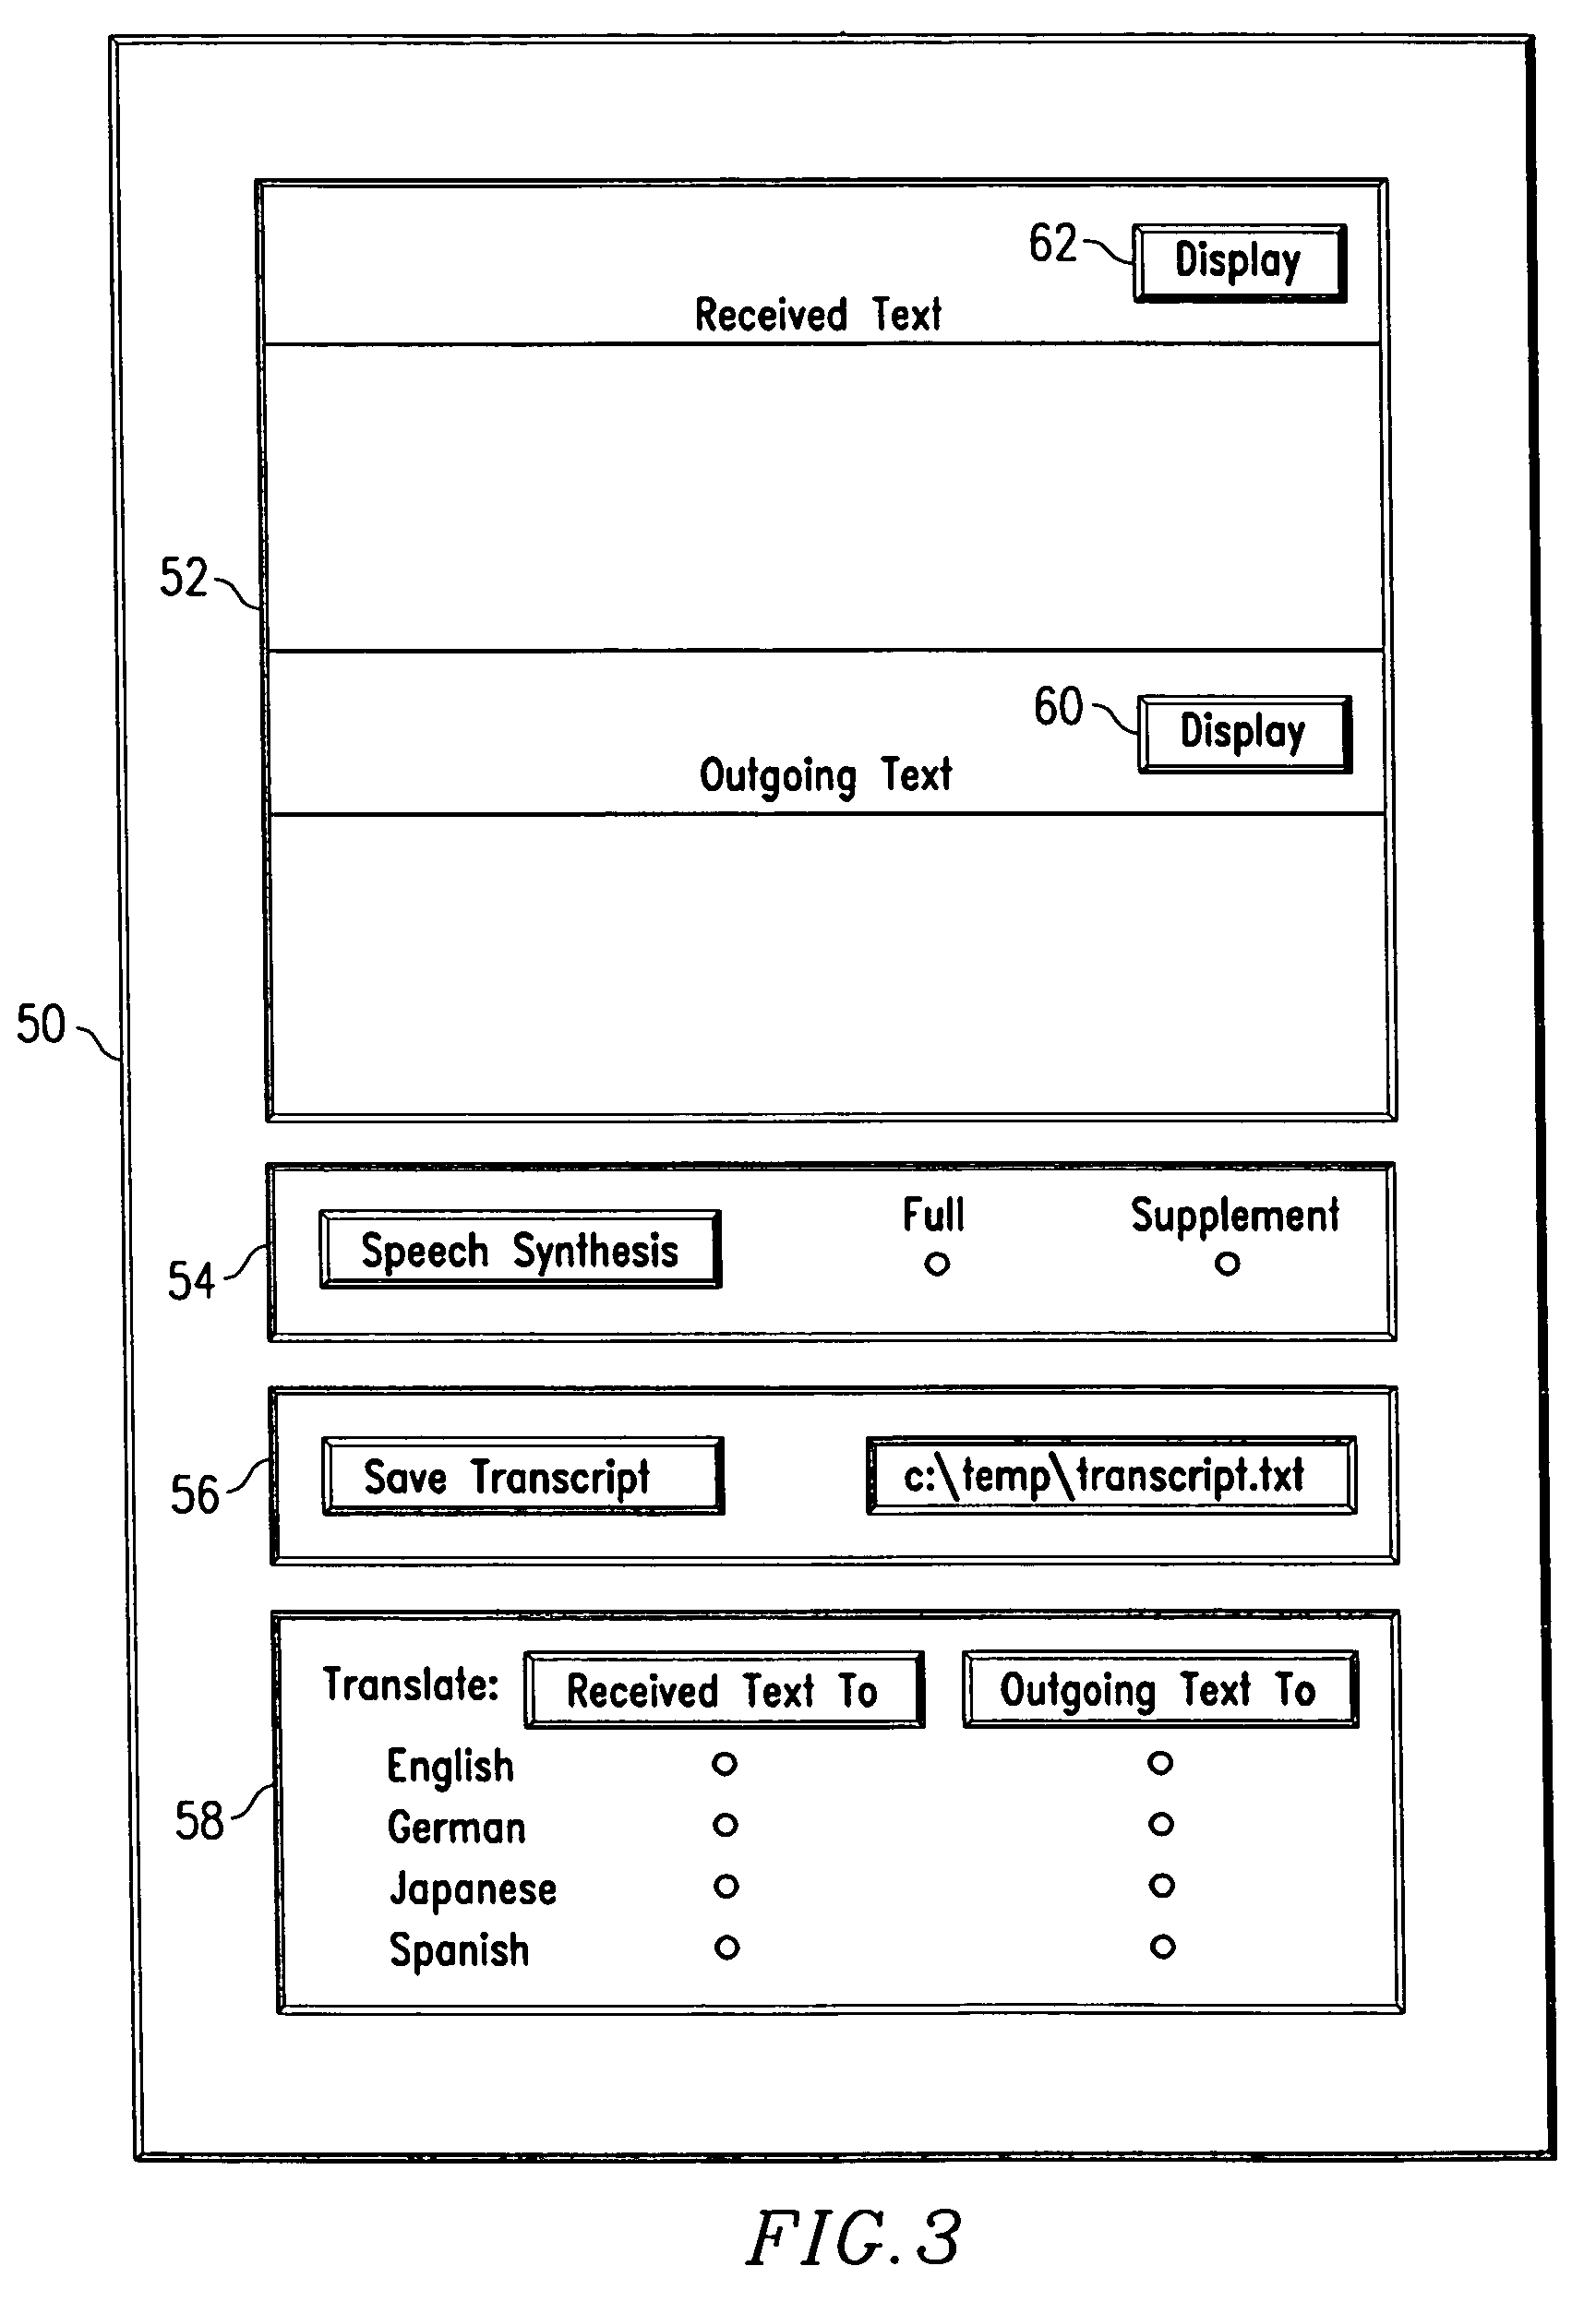 System and method for speech recognition assisted voice communications